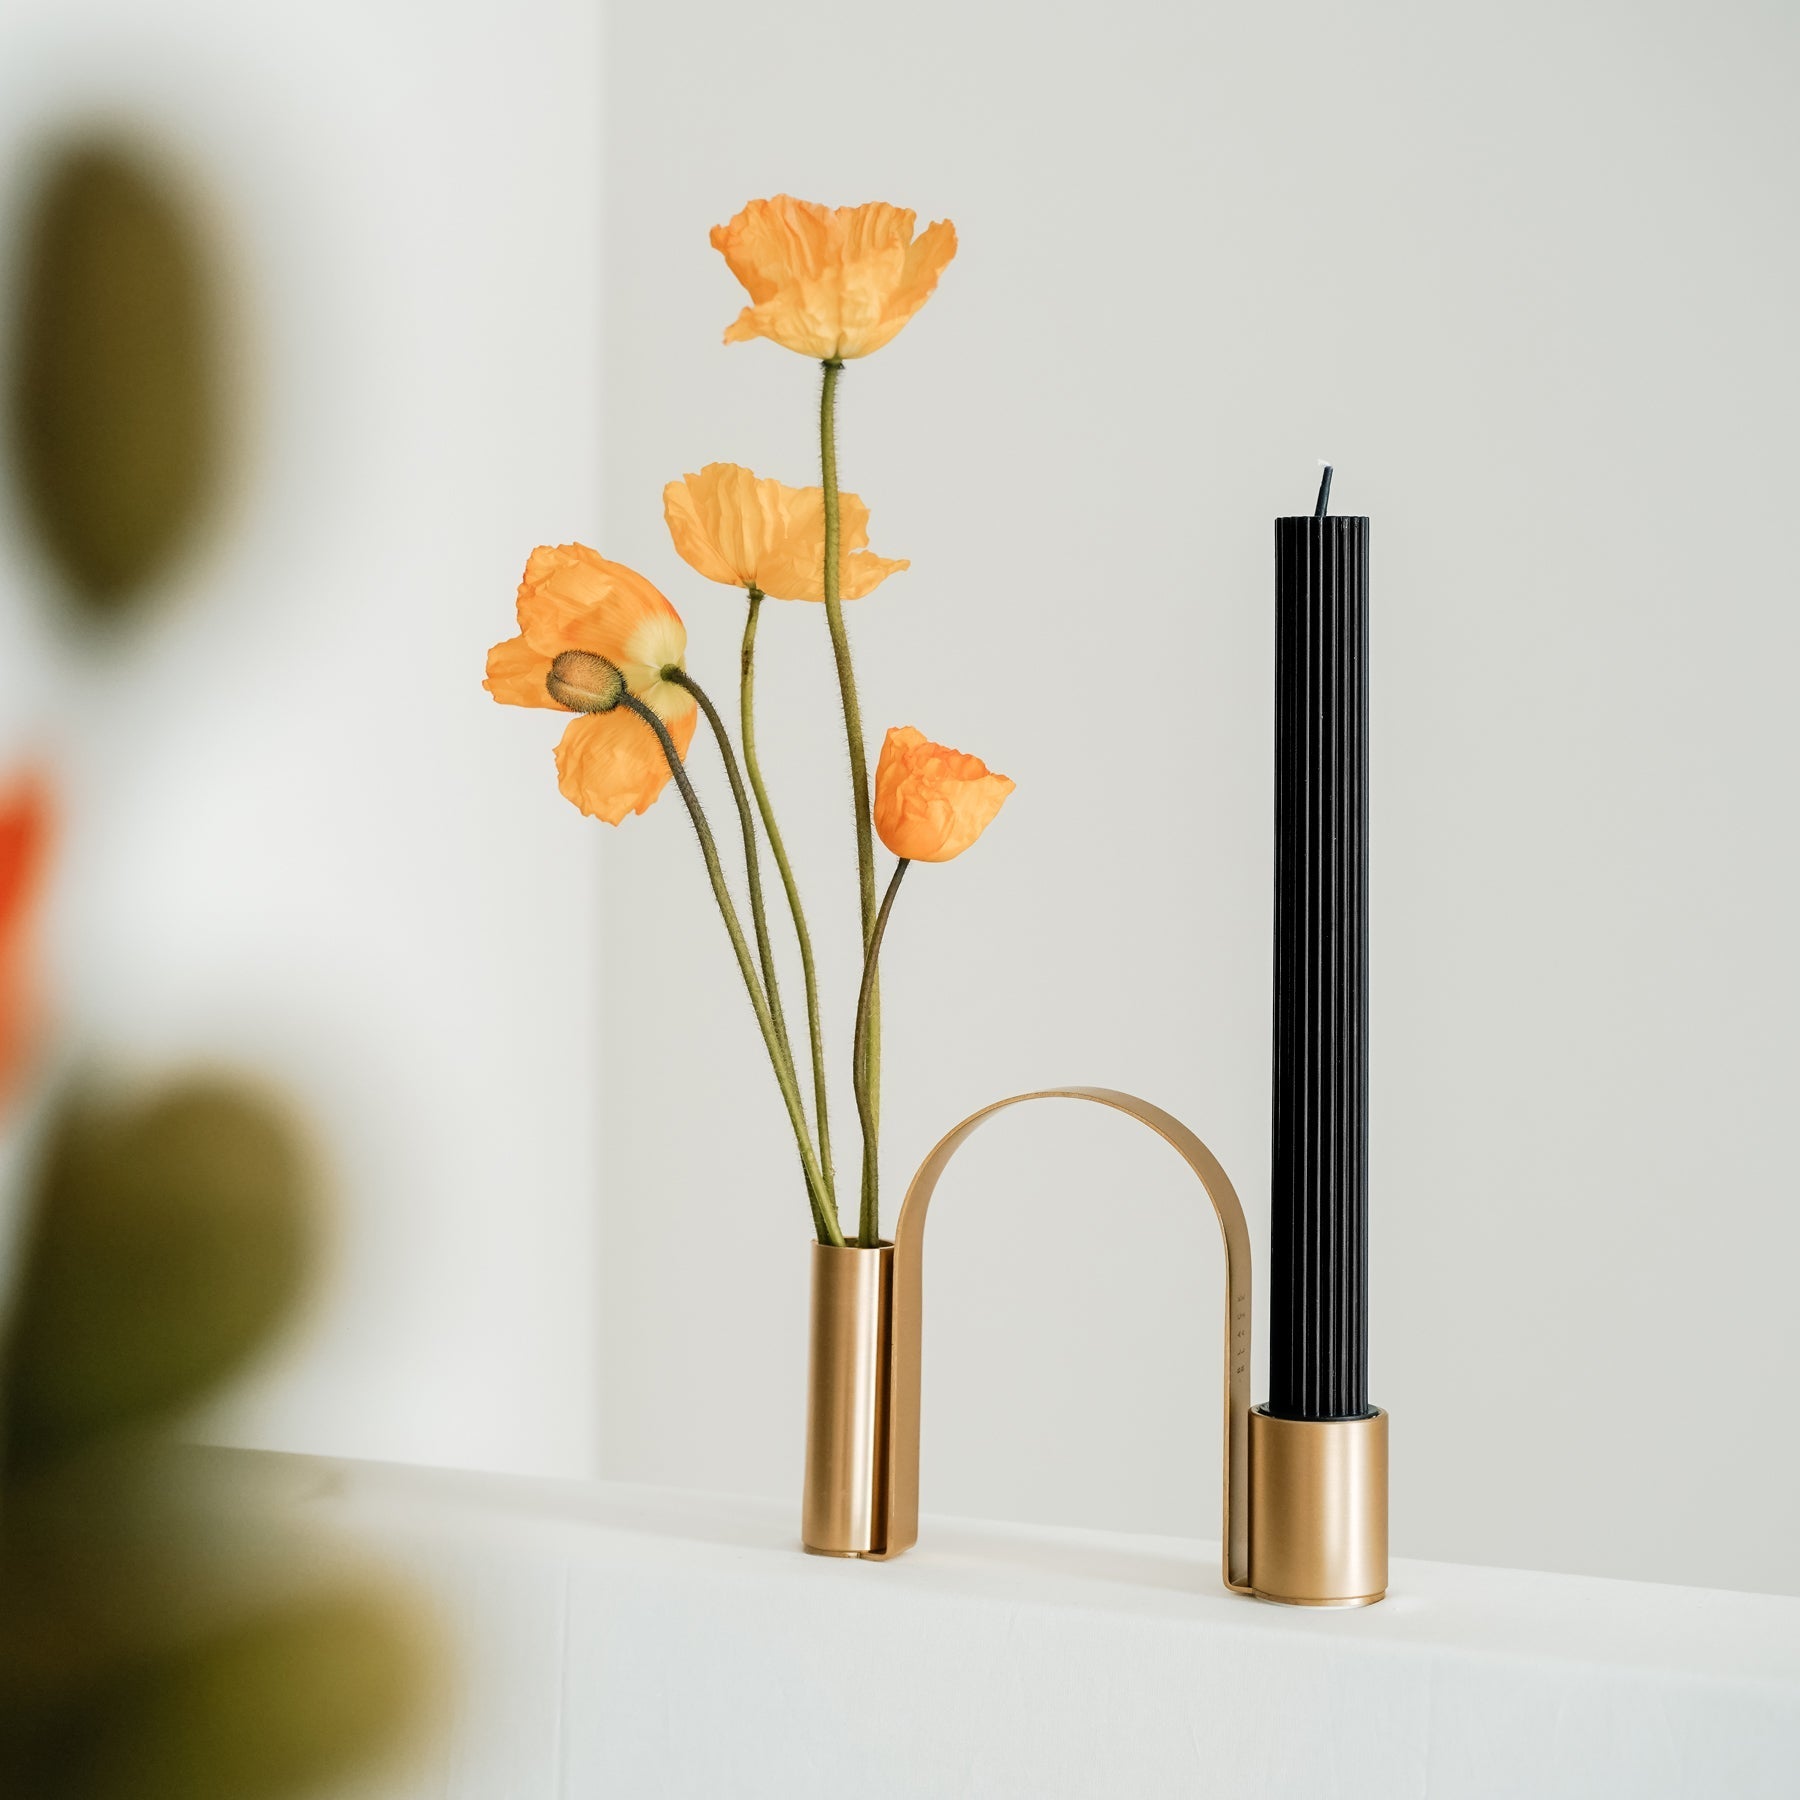 The Arch Brass Holder adds instant graphic appeal to a room. More than just a candle holder, the gently curved arch-like stand can be used as a vase to bring elegance and visual intrigue to spaces.